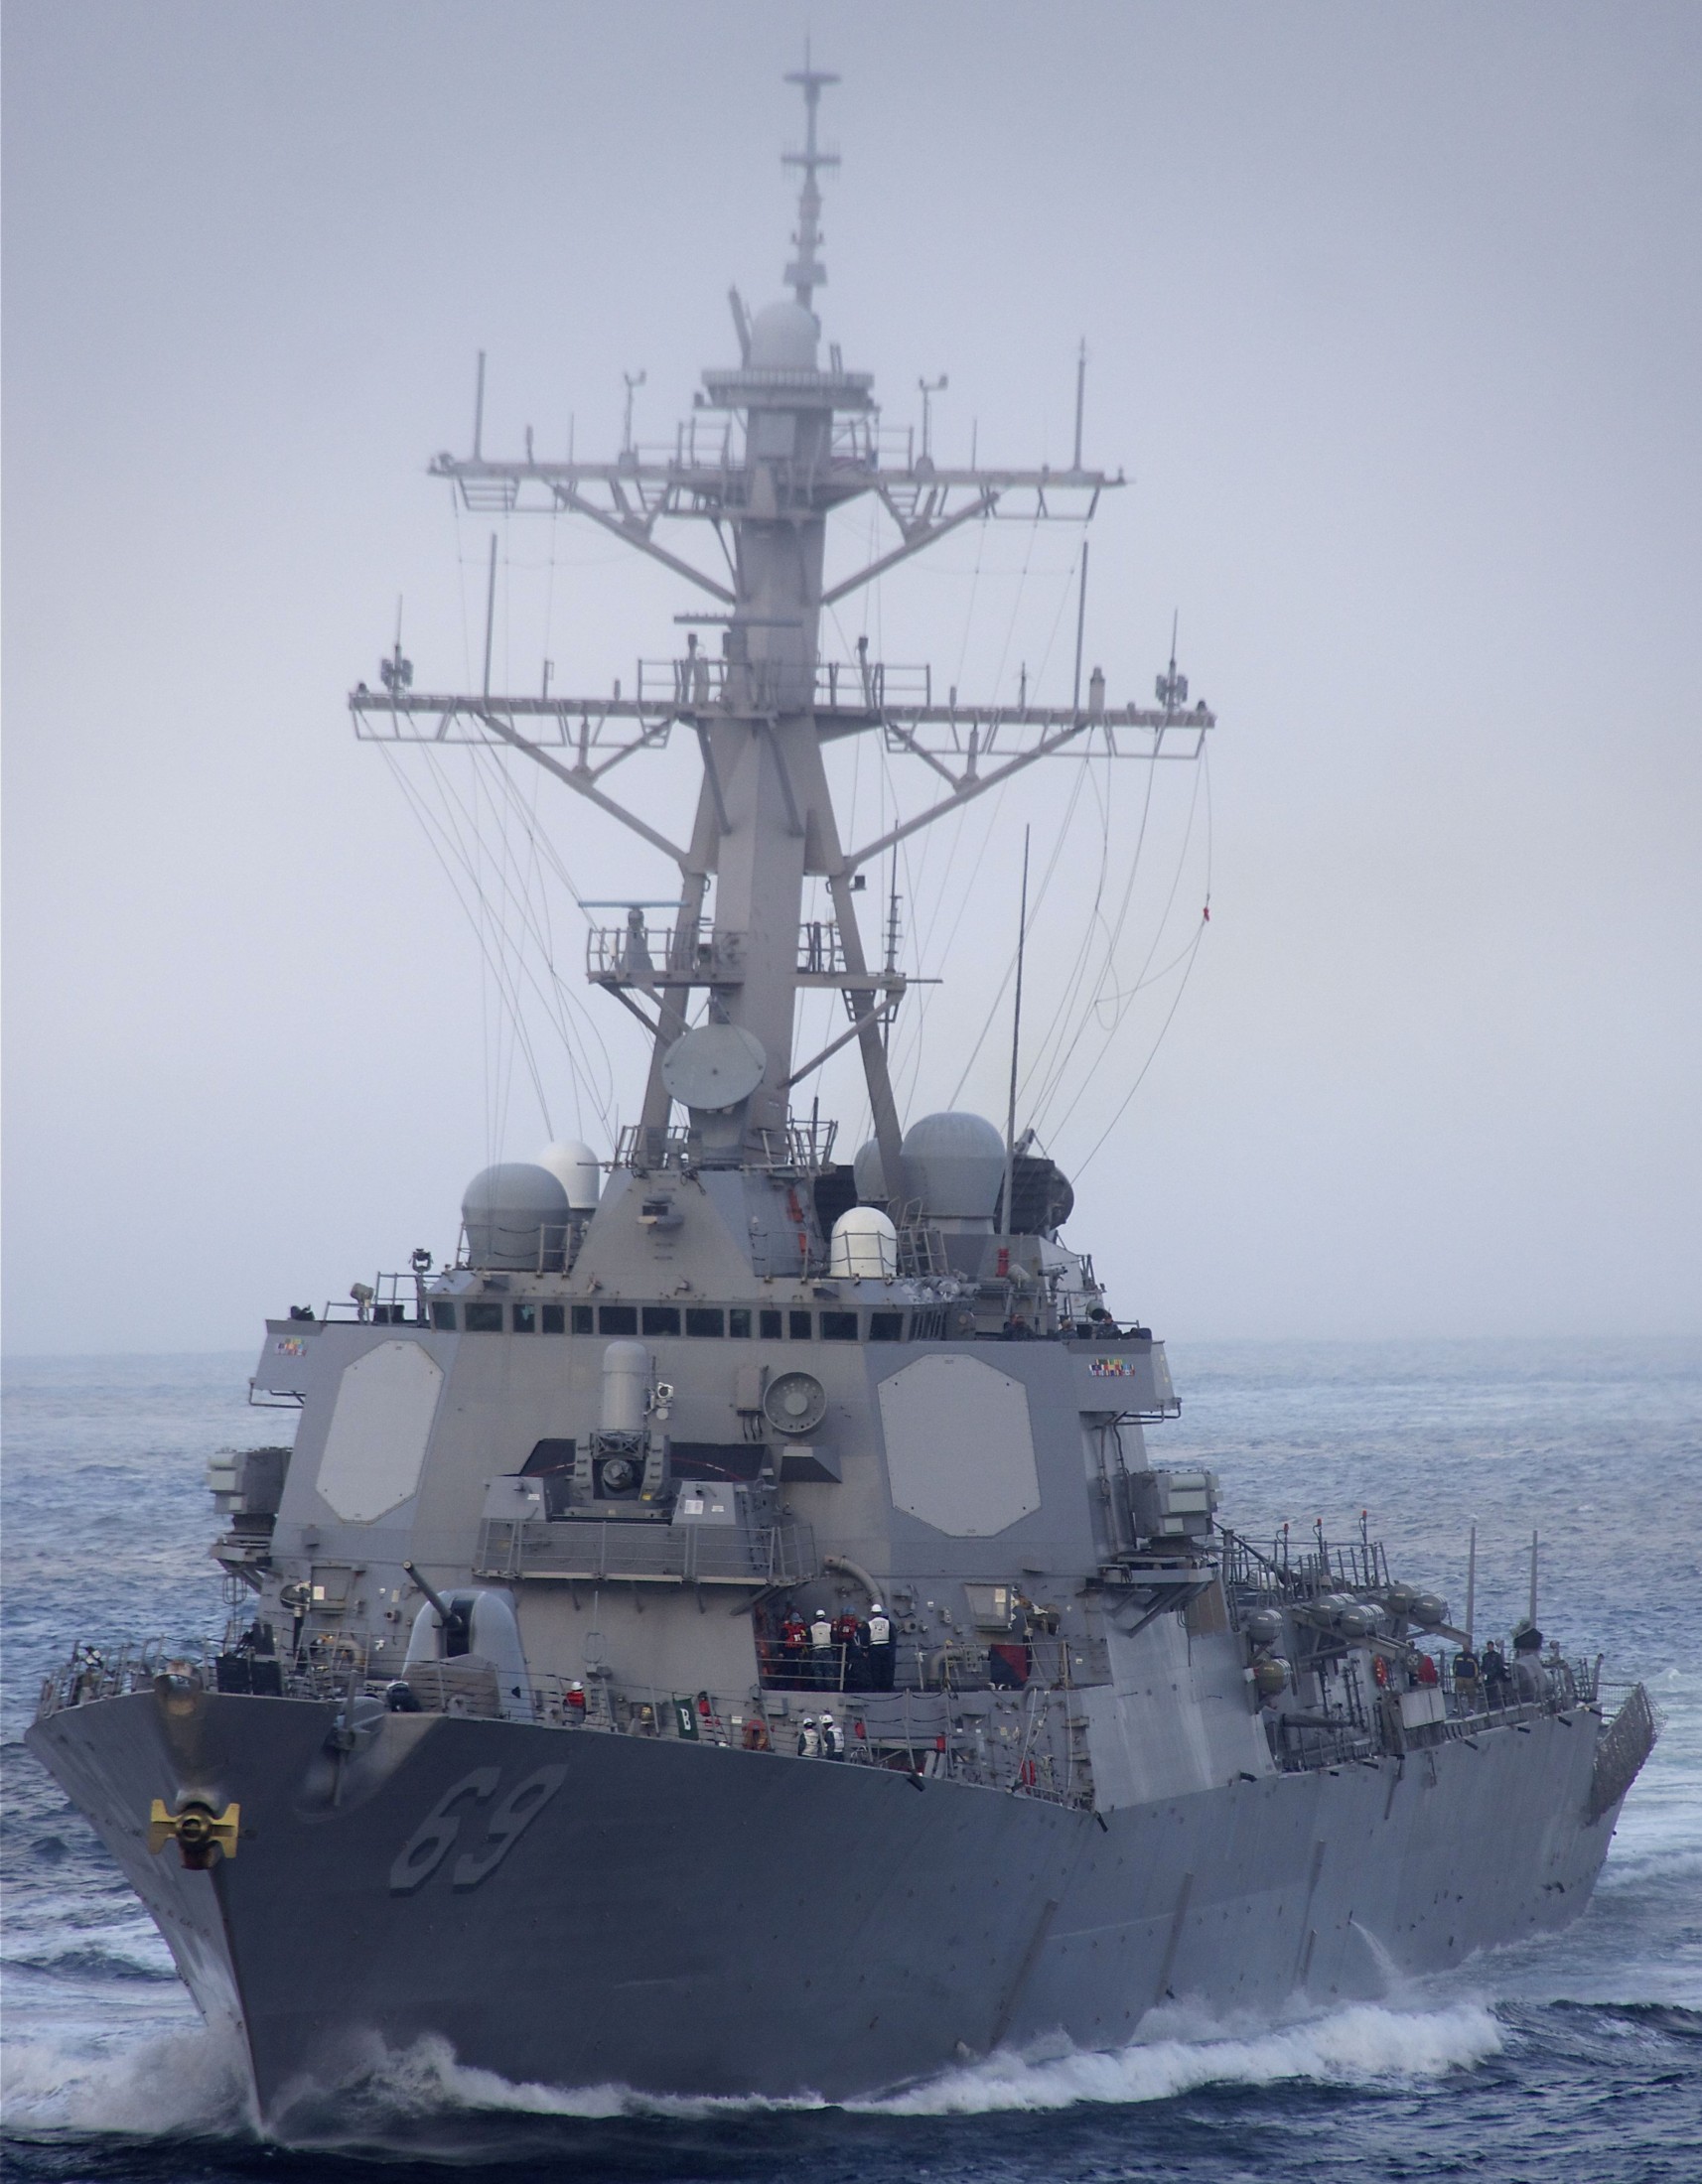 ddg-69 uss milius guided missile destroyer arleigh burke class aegis bmd 24